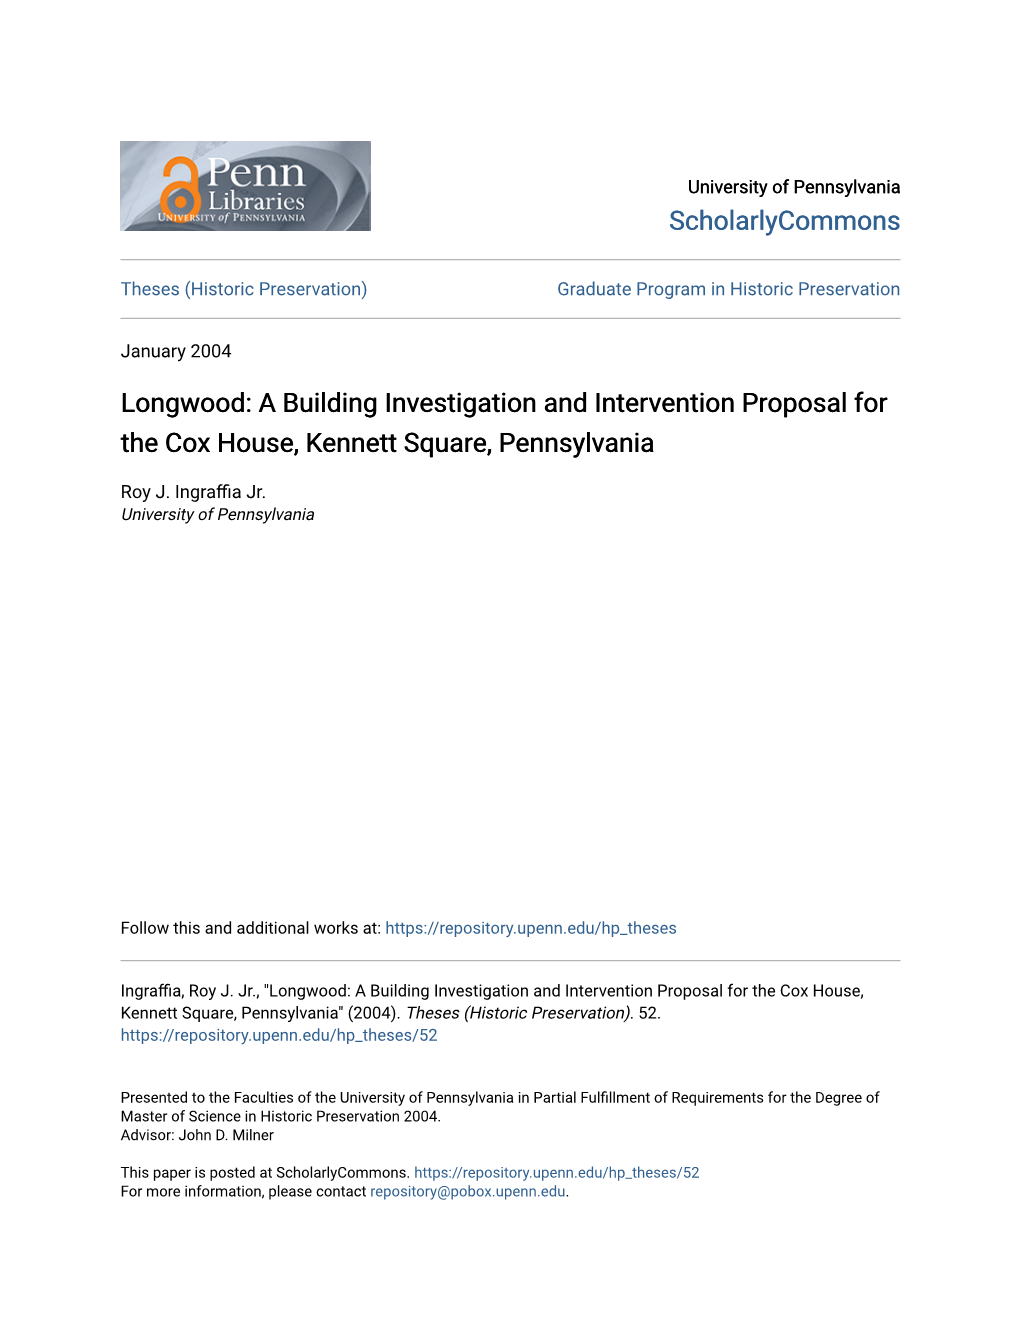 Longwood: a Building Investigation and Intervention Proposal for the Cox House, Kennett Square, Pennsylvania